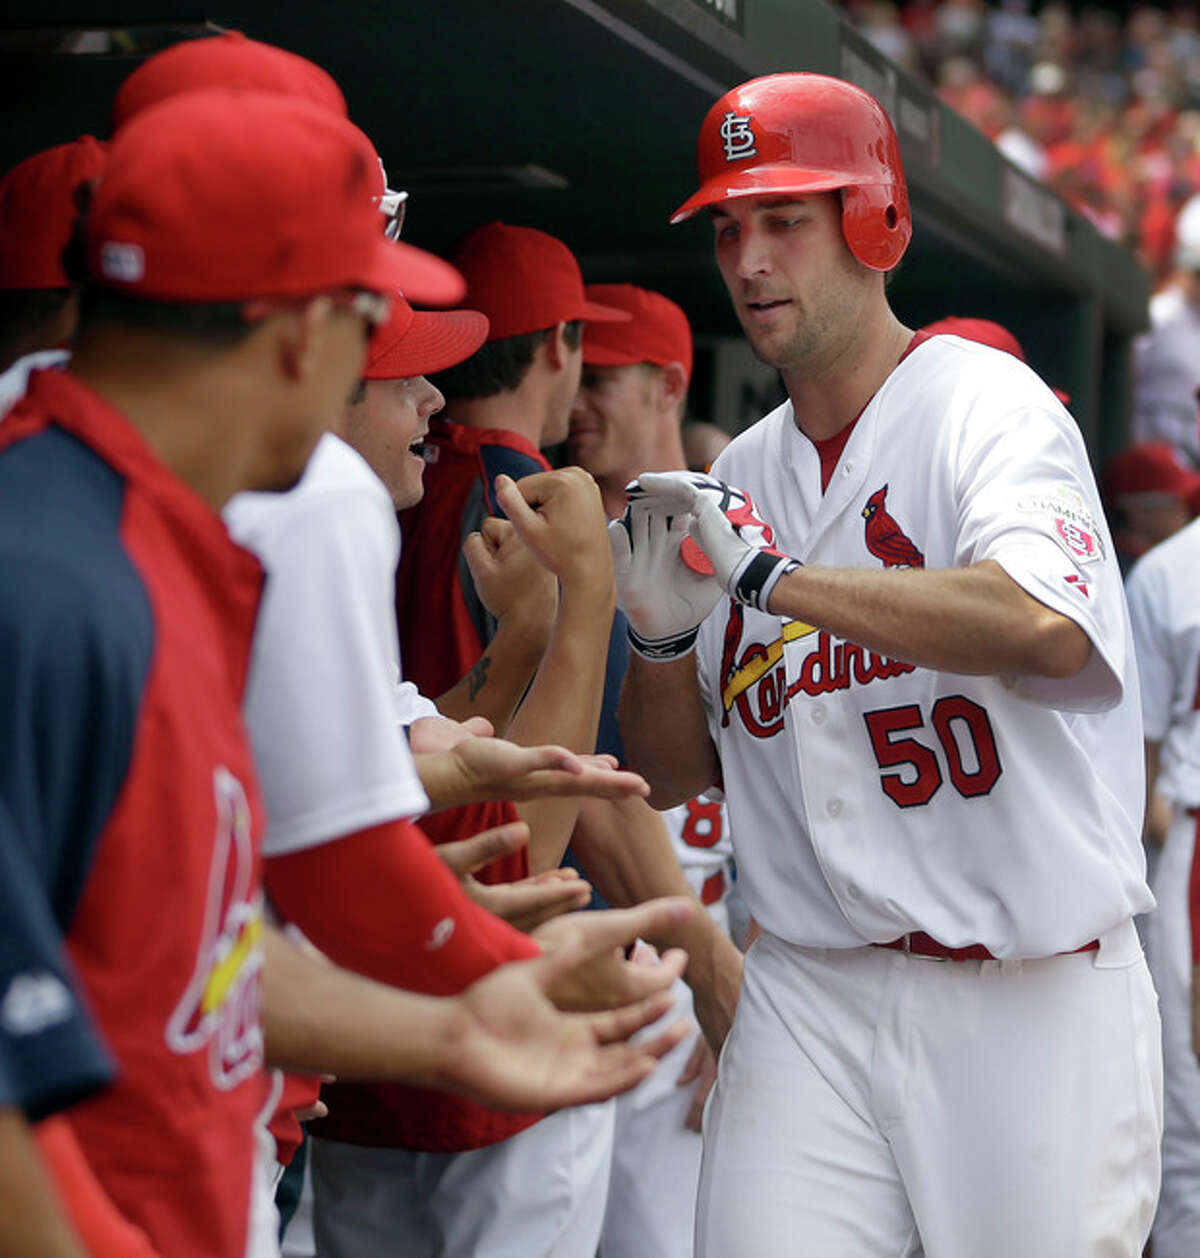 St. Louis Cardinals' Adam Wainwright is congratulated by teammates in the dugout after hitting a solo home run during the third inning of a baseball game against the New York Mets, Wednesday, Sept. 5, 2012, in St. Louis. (AP Photo/Jeff Roberson)